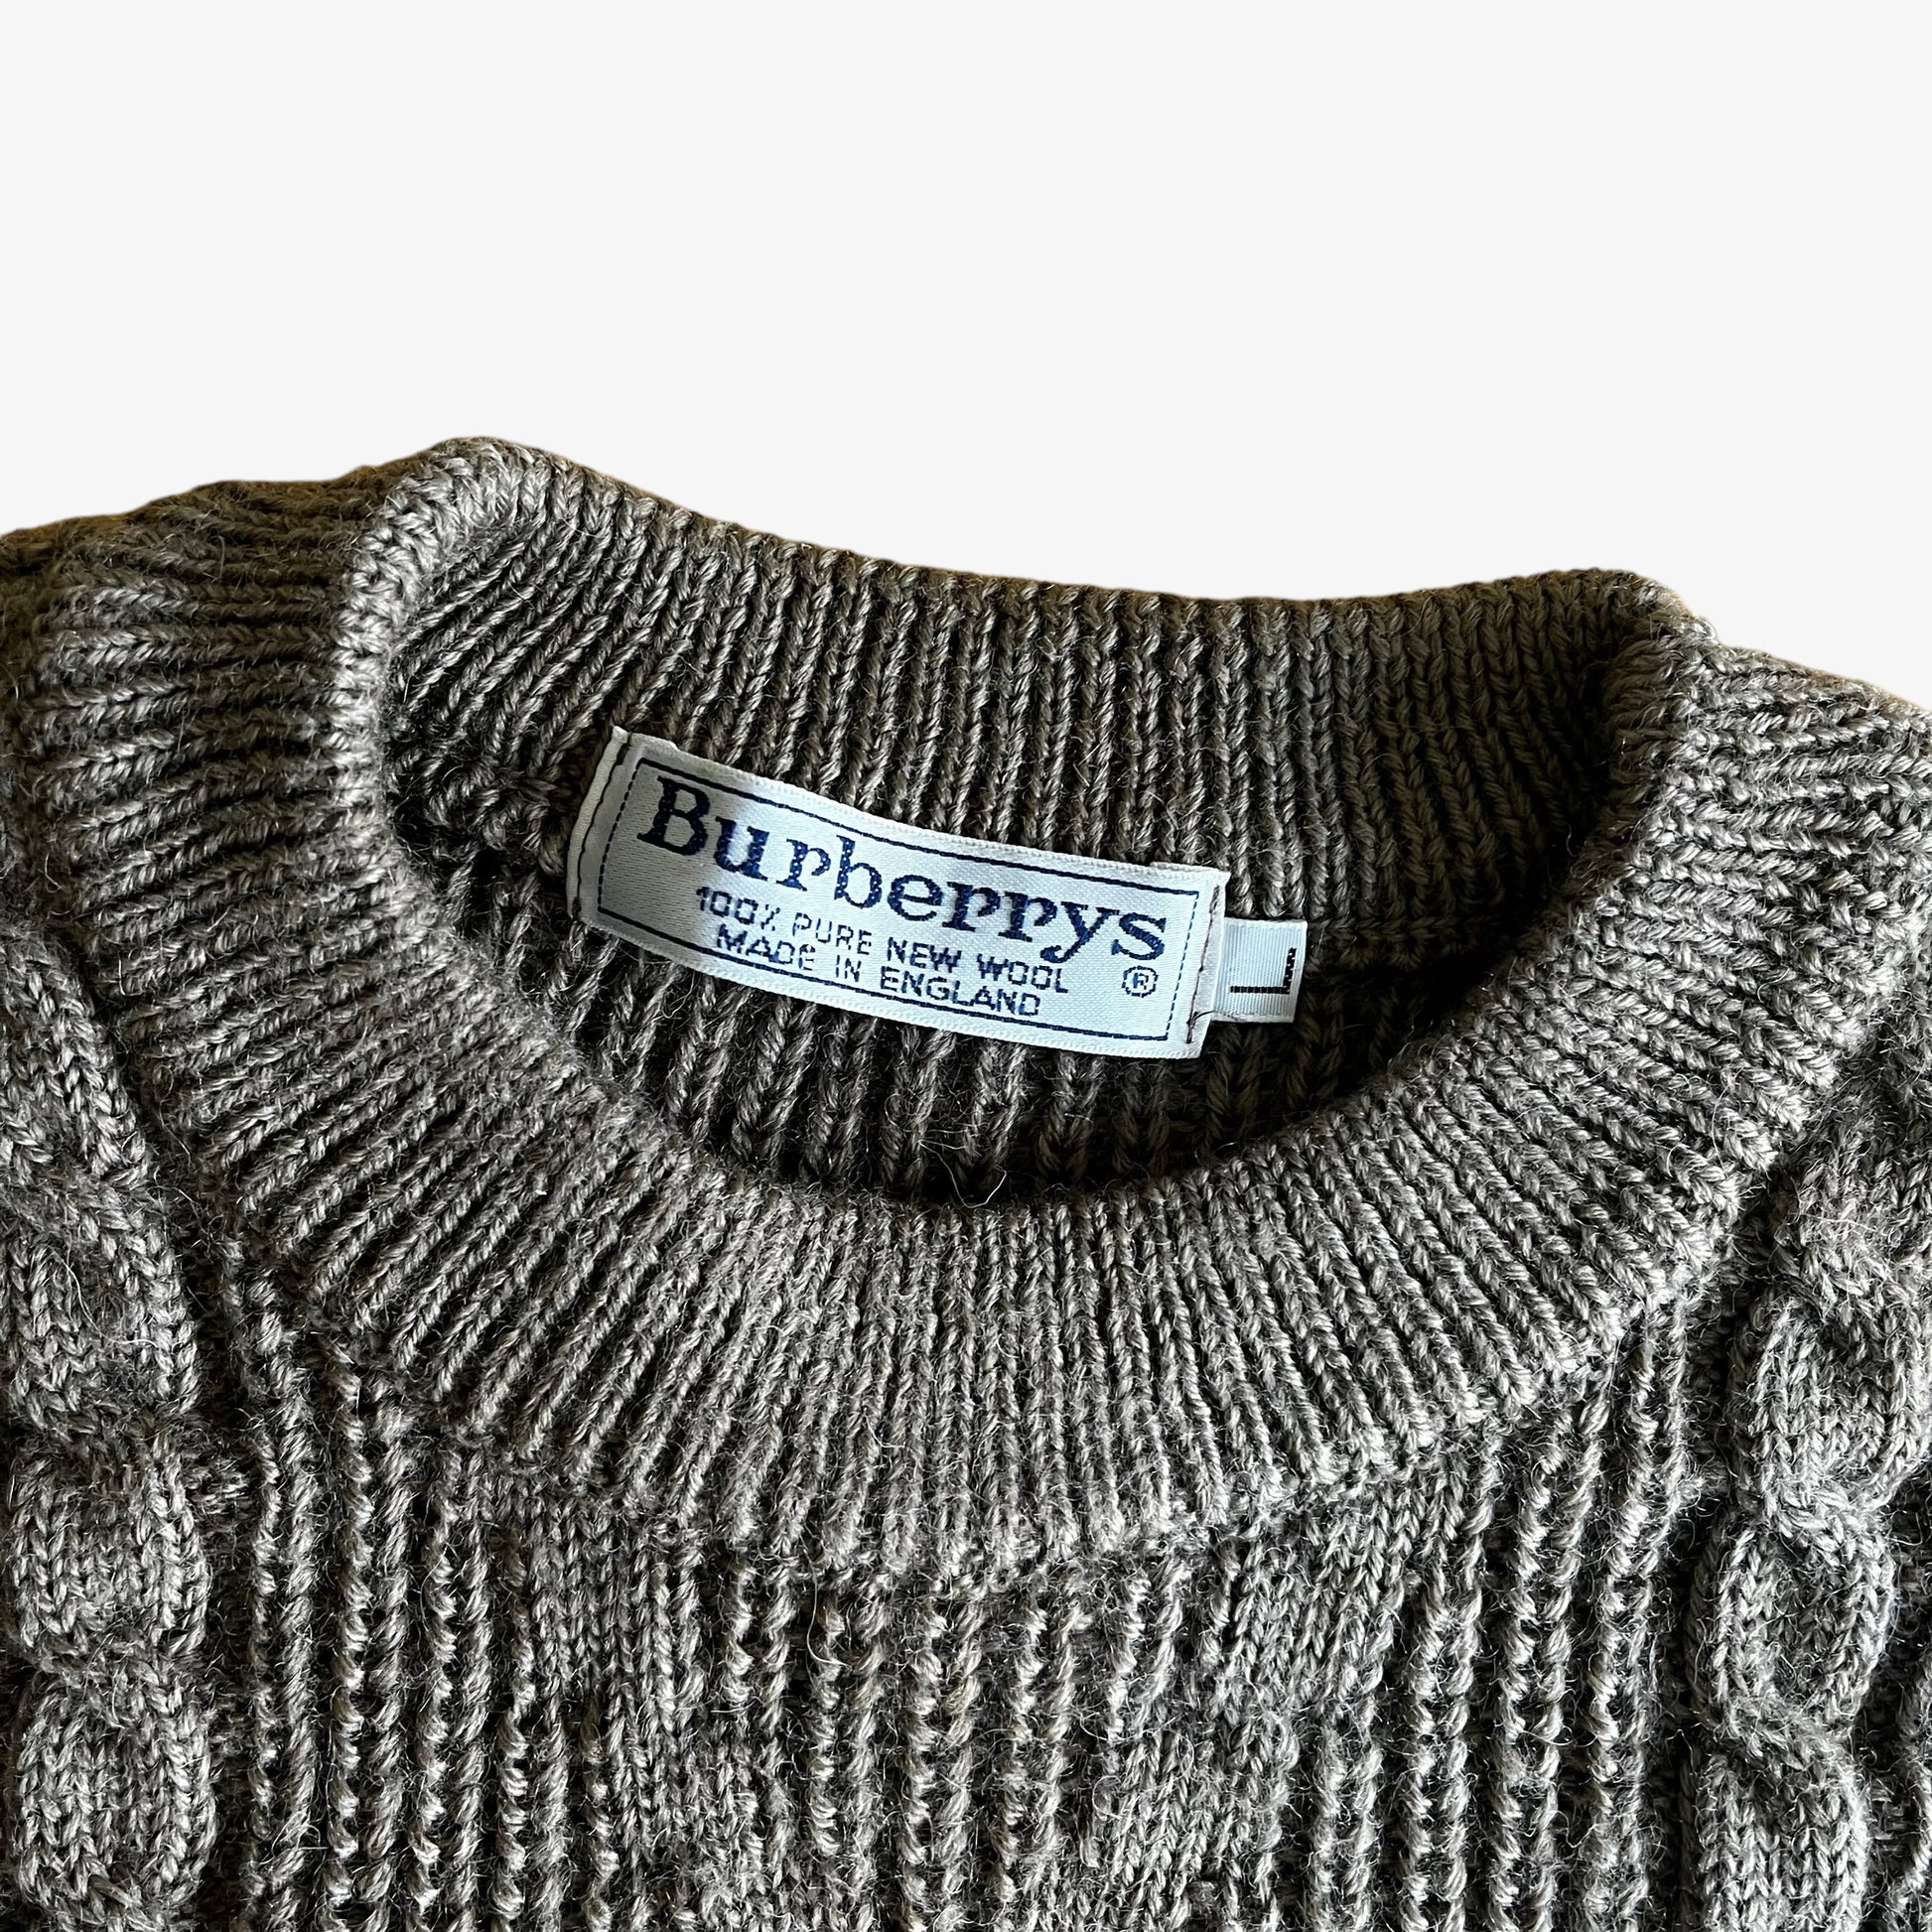 Vintage 1980s Burberry Cable Knit Jumper With Centre Knight Logo Crest Label - Casspios Dream